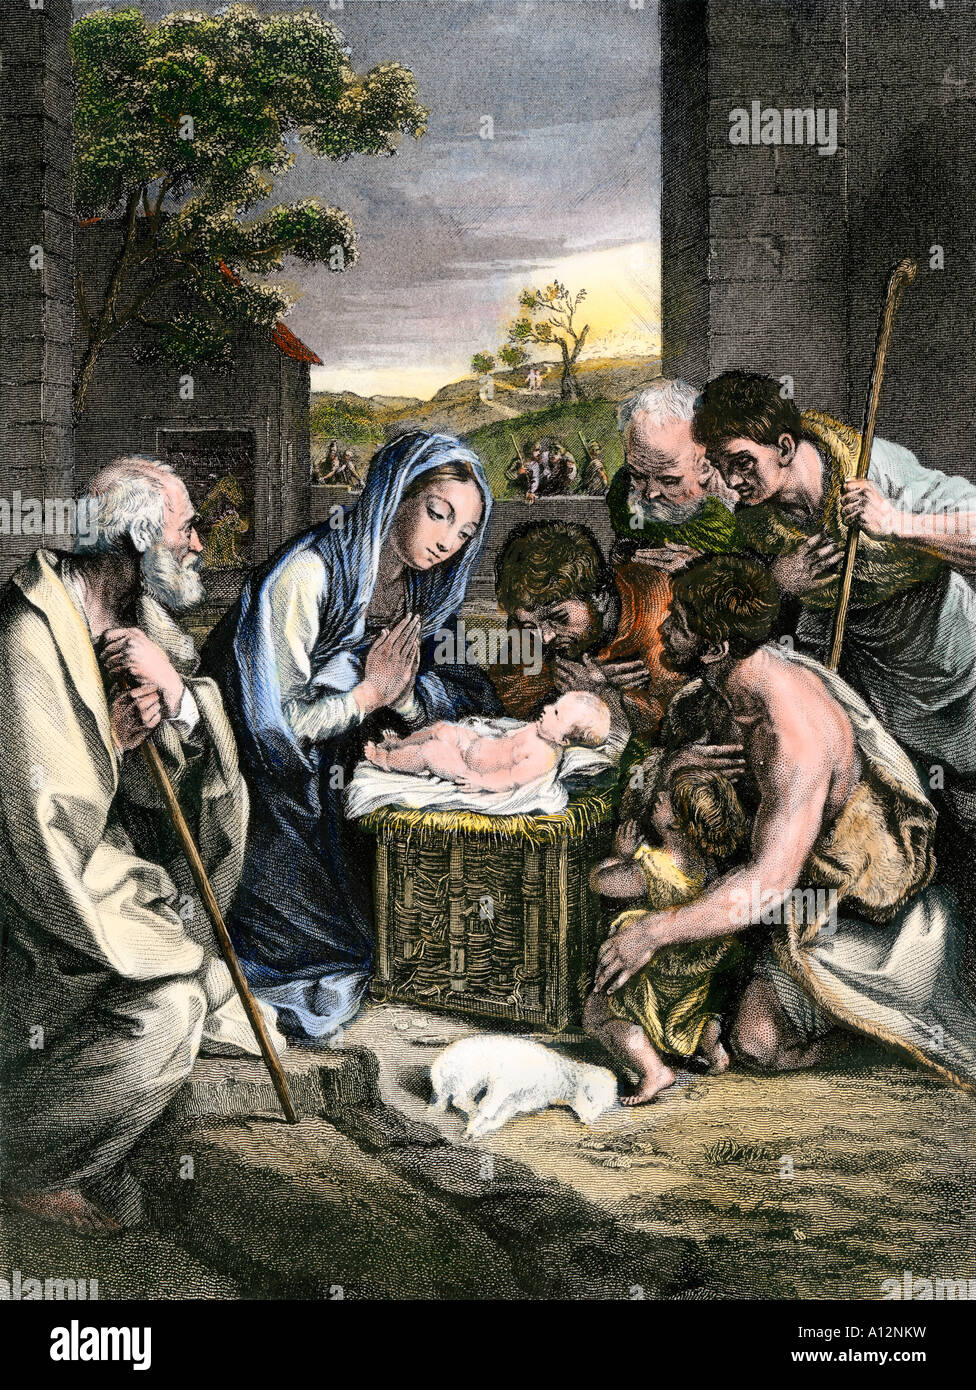 Shepherds worshipping baby Jesus lying in a manger in Bethlehem. Hand-colored halftone of an illustration Stock Photo